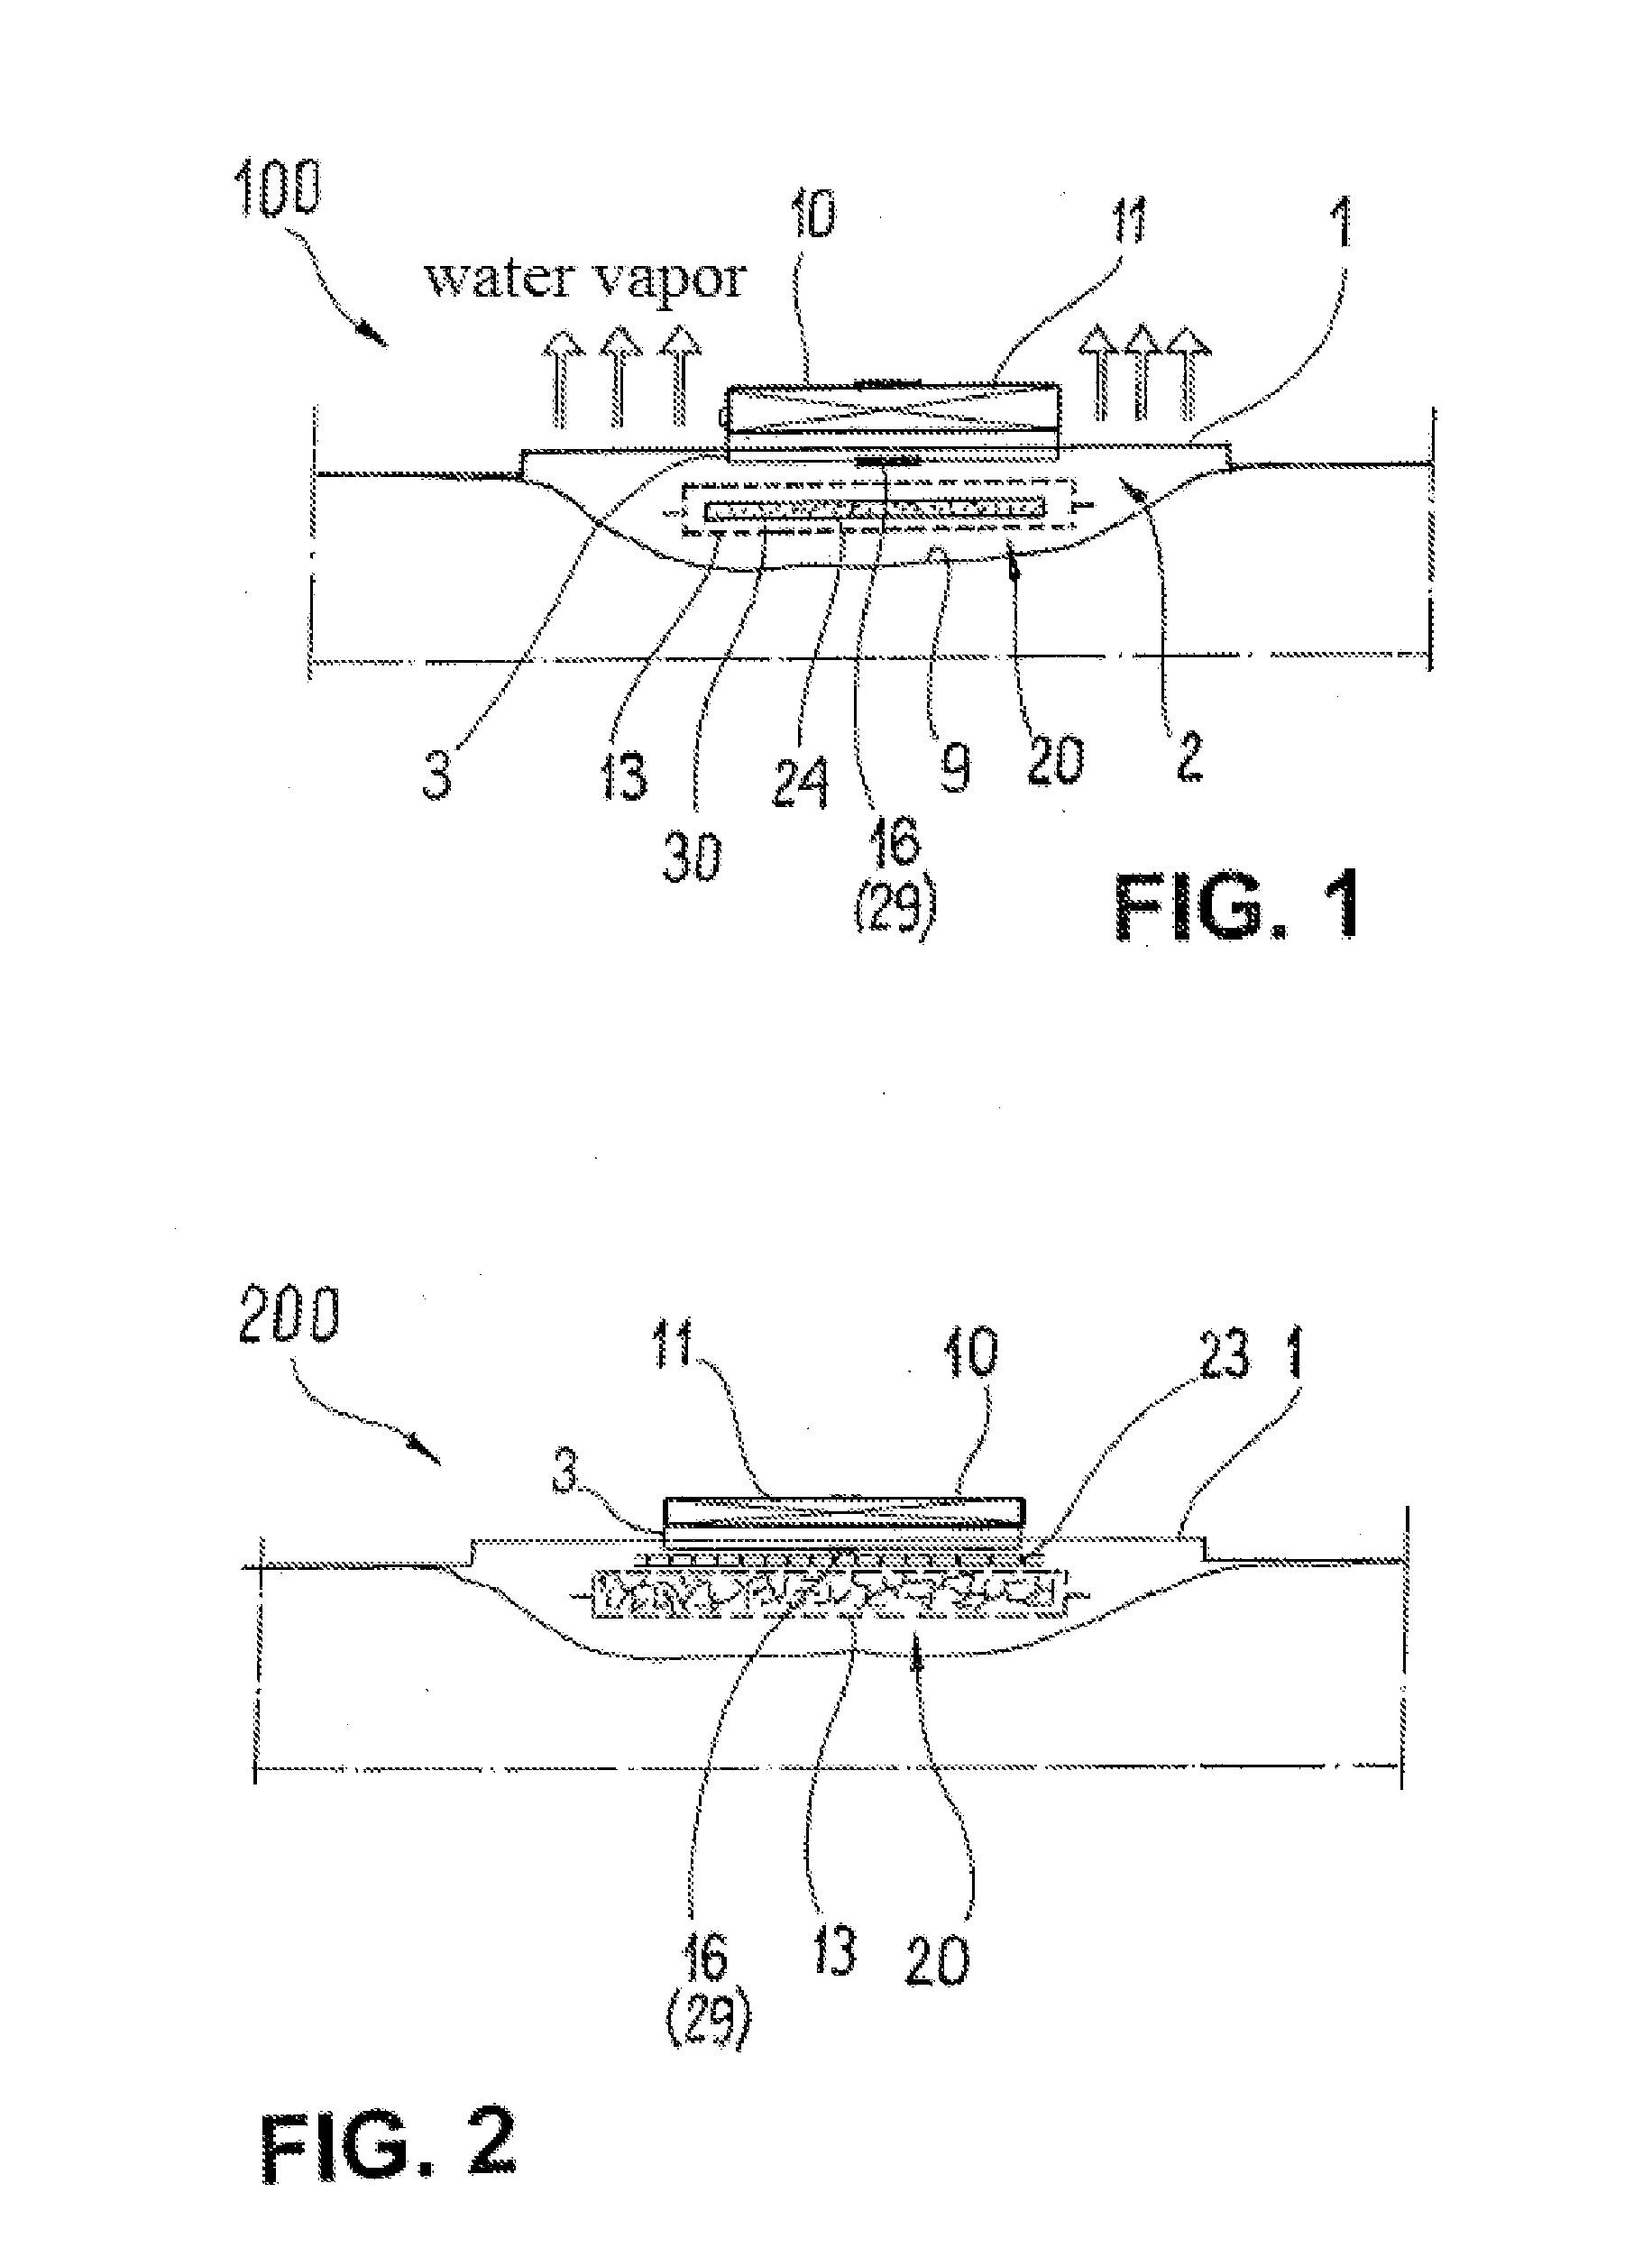 Wound care device for treating wounds by means of subatmospheric pressure